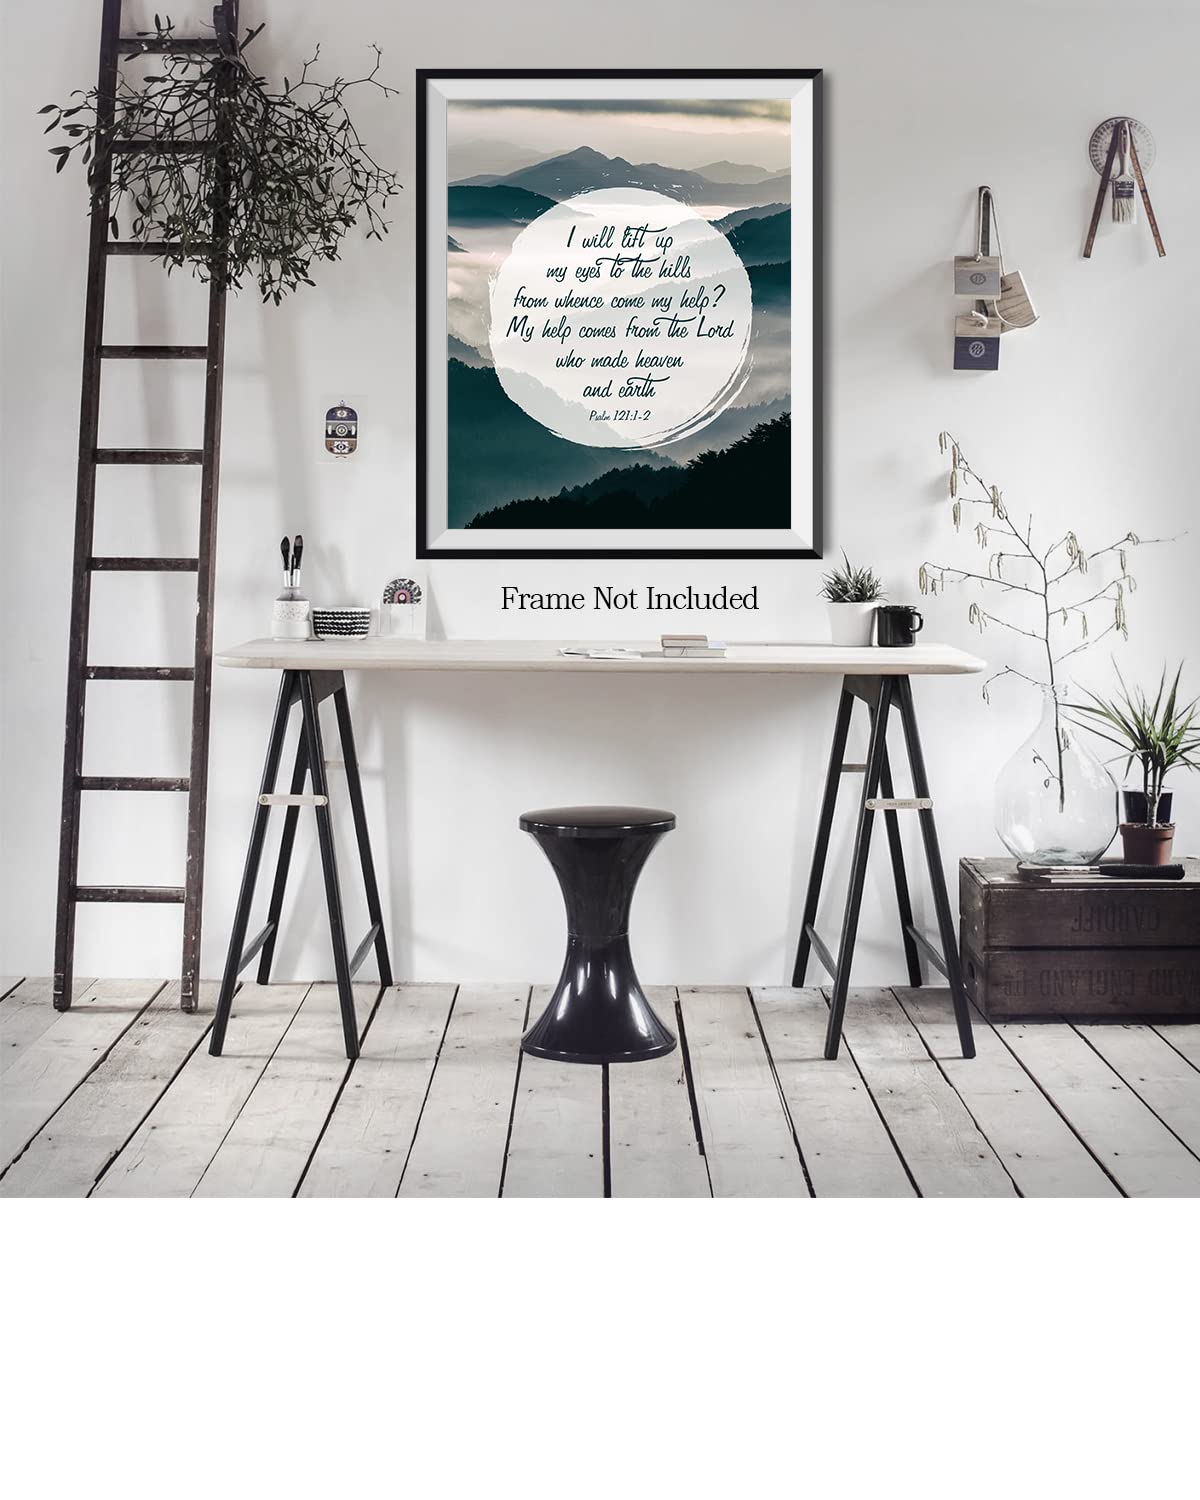 My Help Comes From The Lord - Psalm 121:1-2 Bible Verse - Christian Home Decor - Religious Scriptures Wall Art